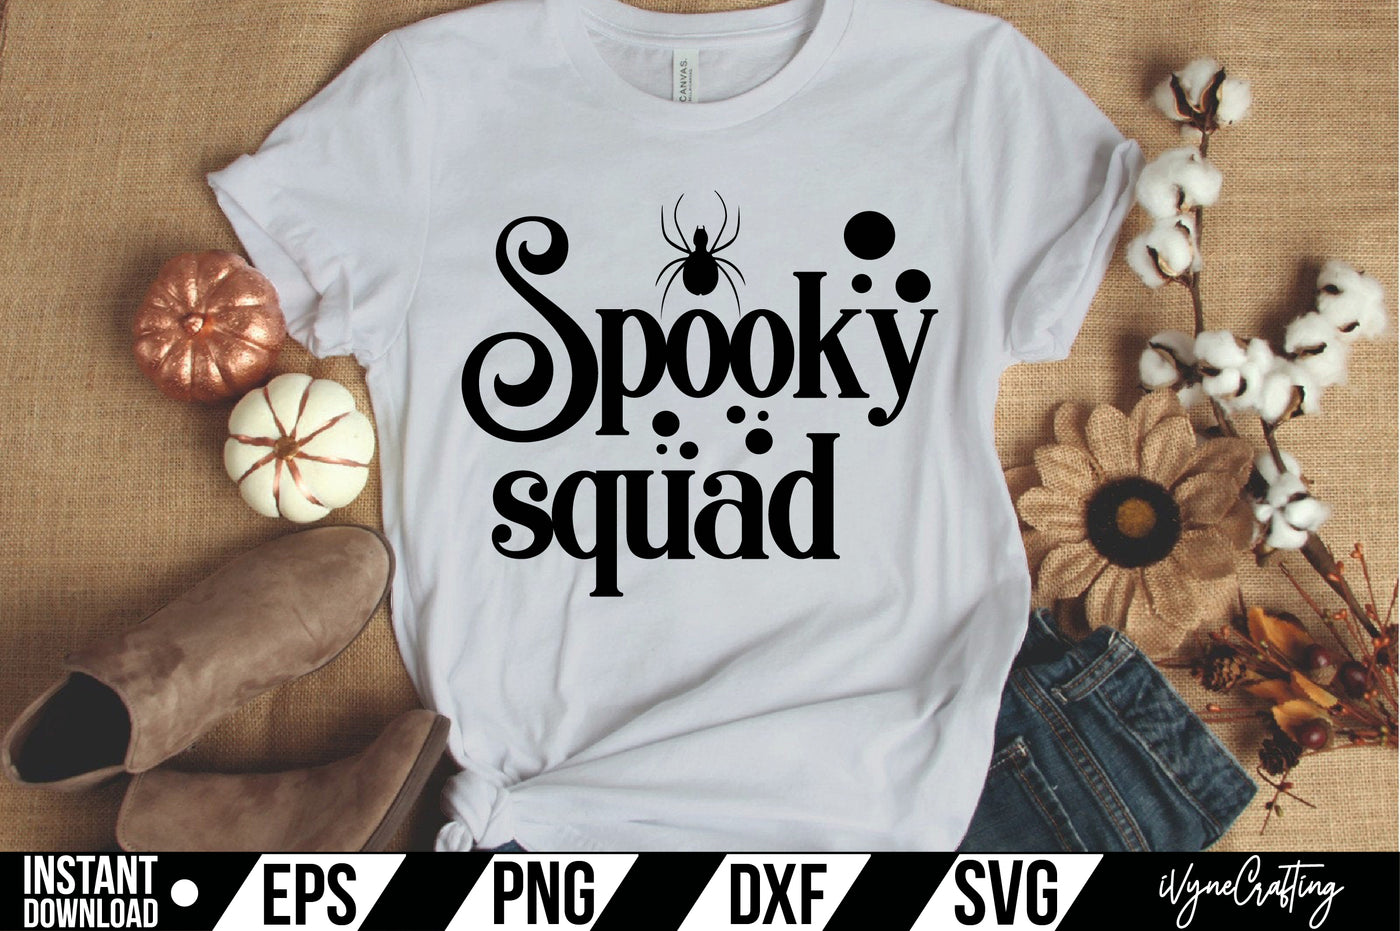 Scary squad SVG Cut File